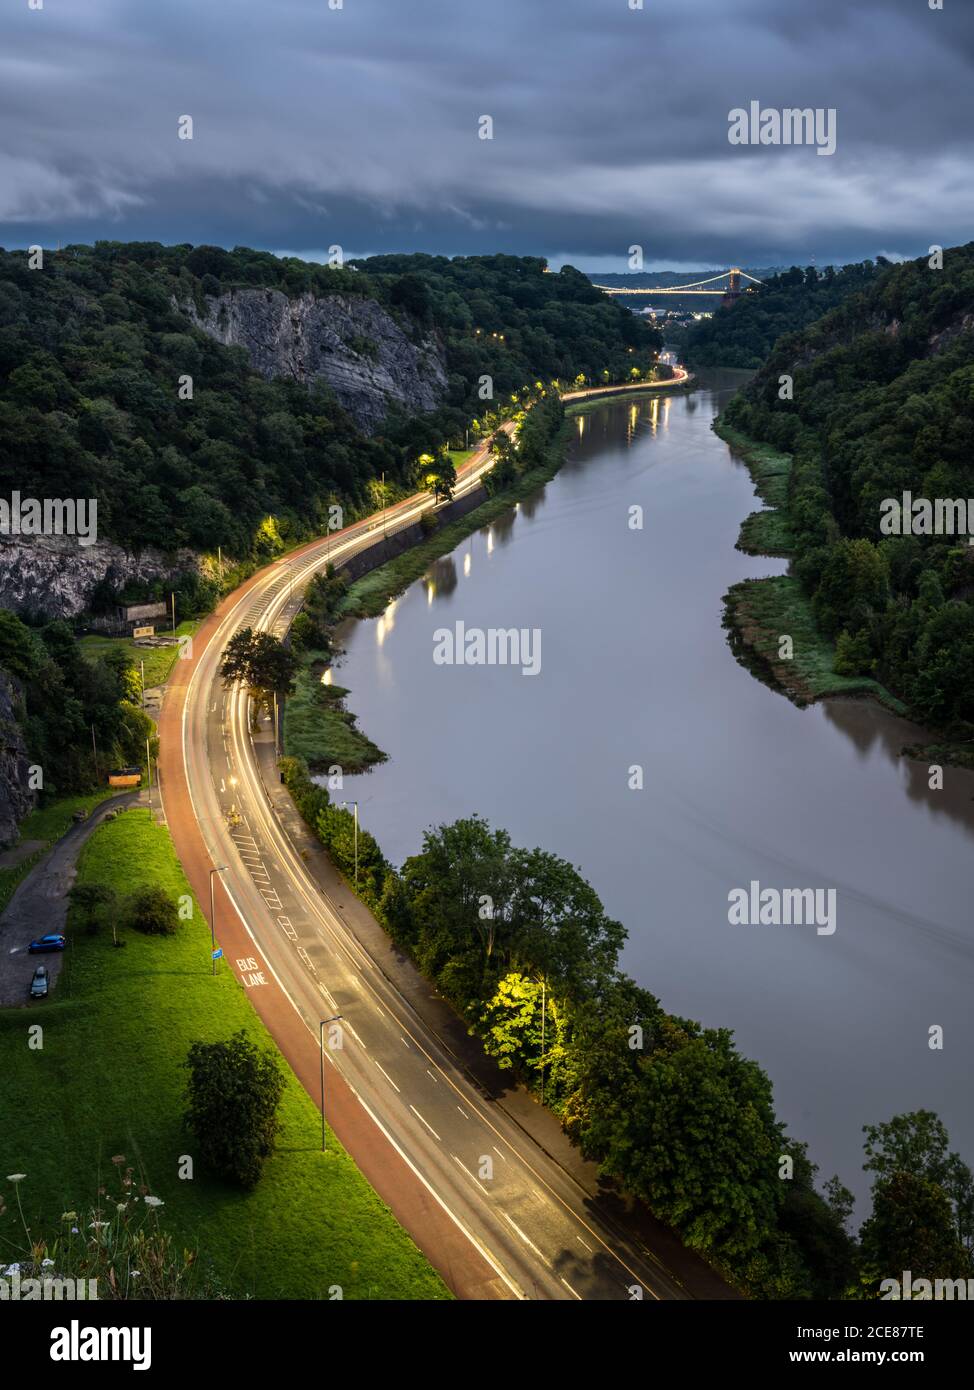 Traffic leaves trails of light at dusk on the A4 Portway Road under the Clifton Suspension Bridge in Bristol's River Avon Gorge. Stock Photo